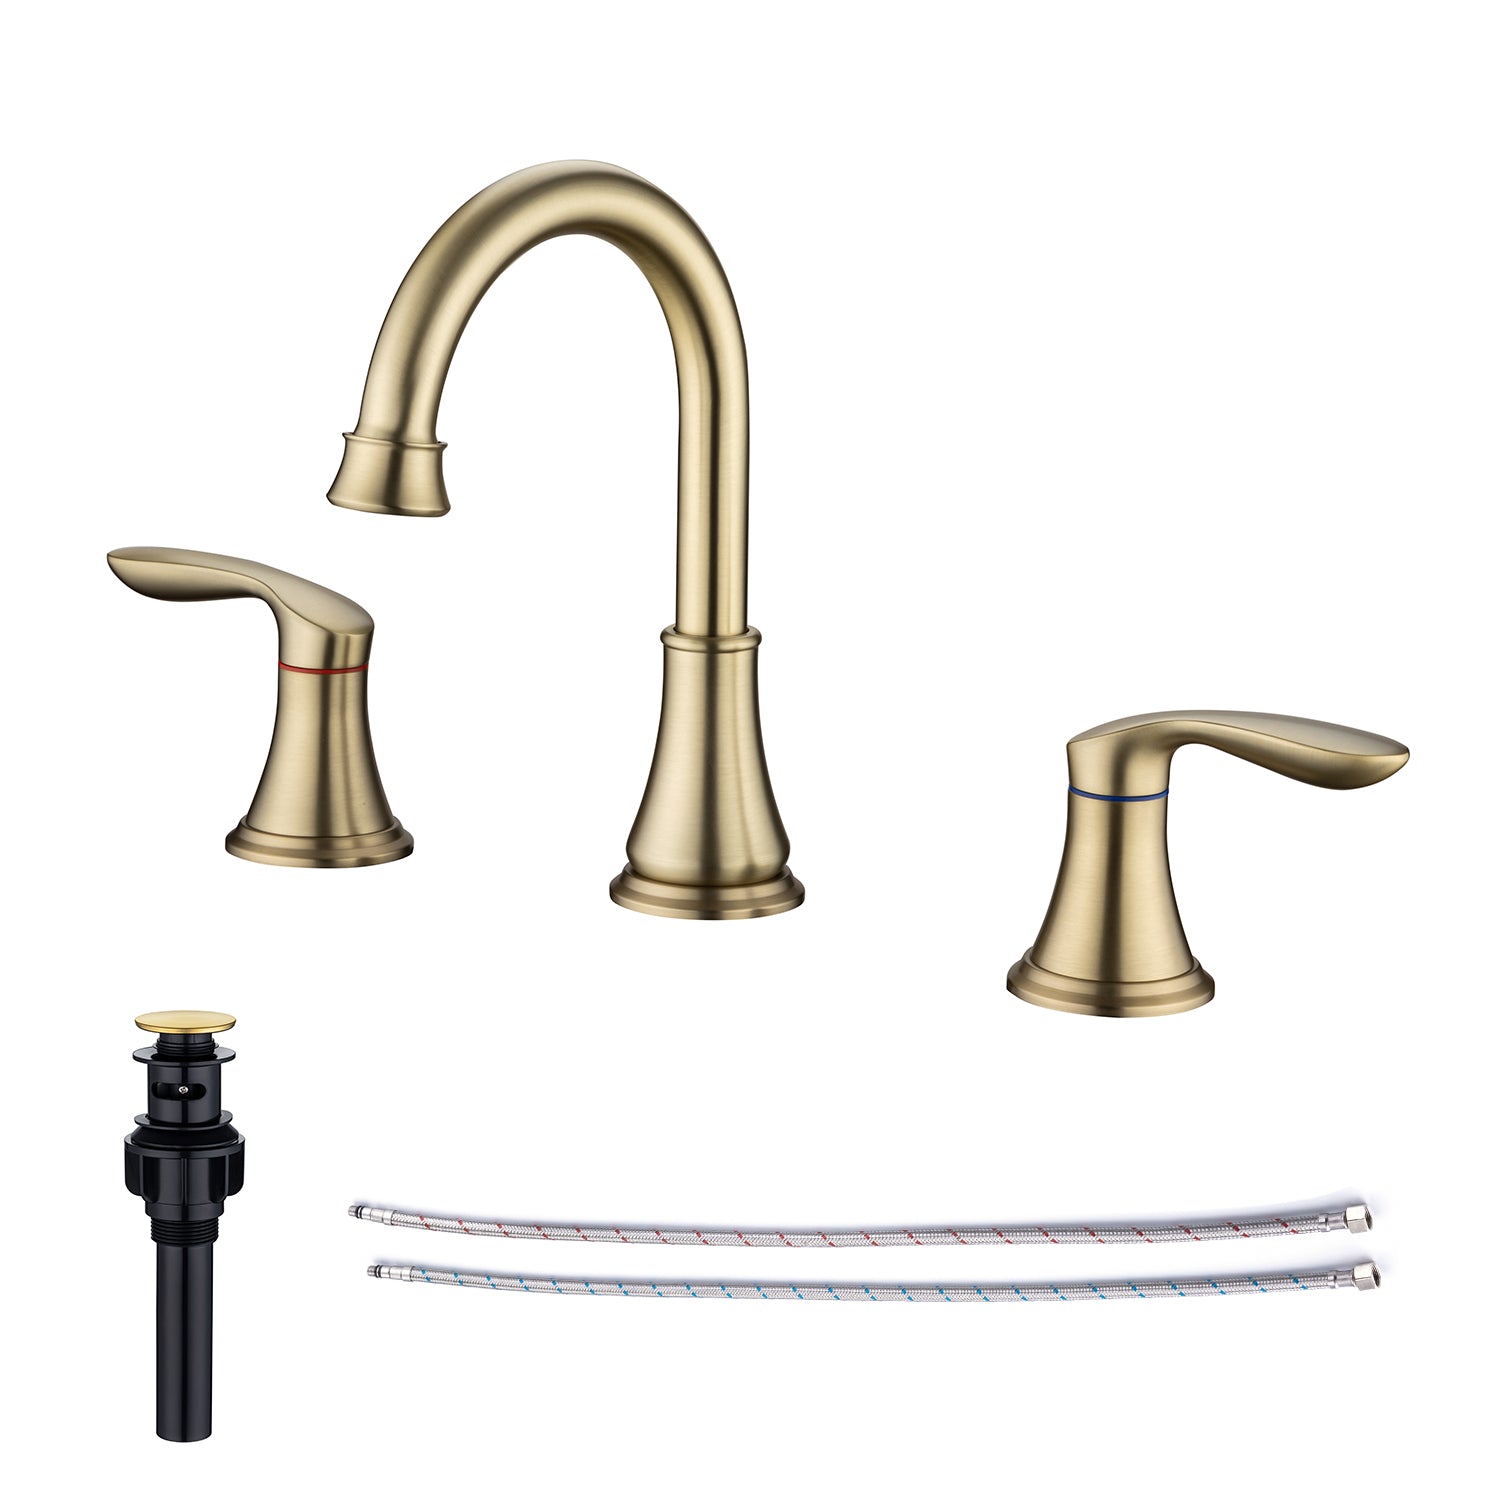 Widespread Faucet 2-handle Bathroom Faucet with Drain Assembly RX83001